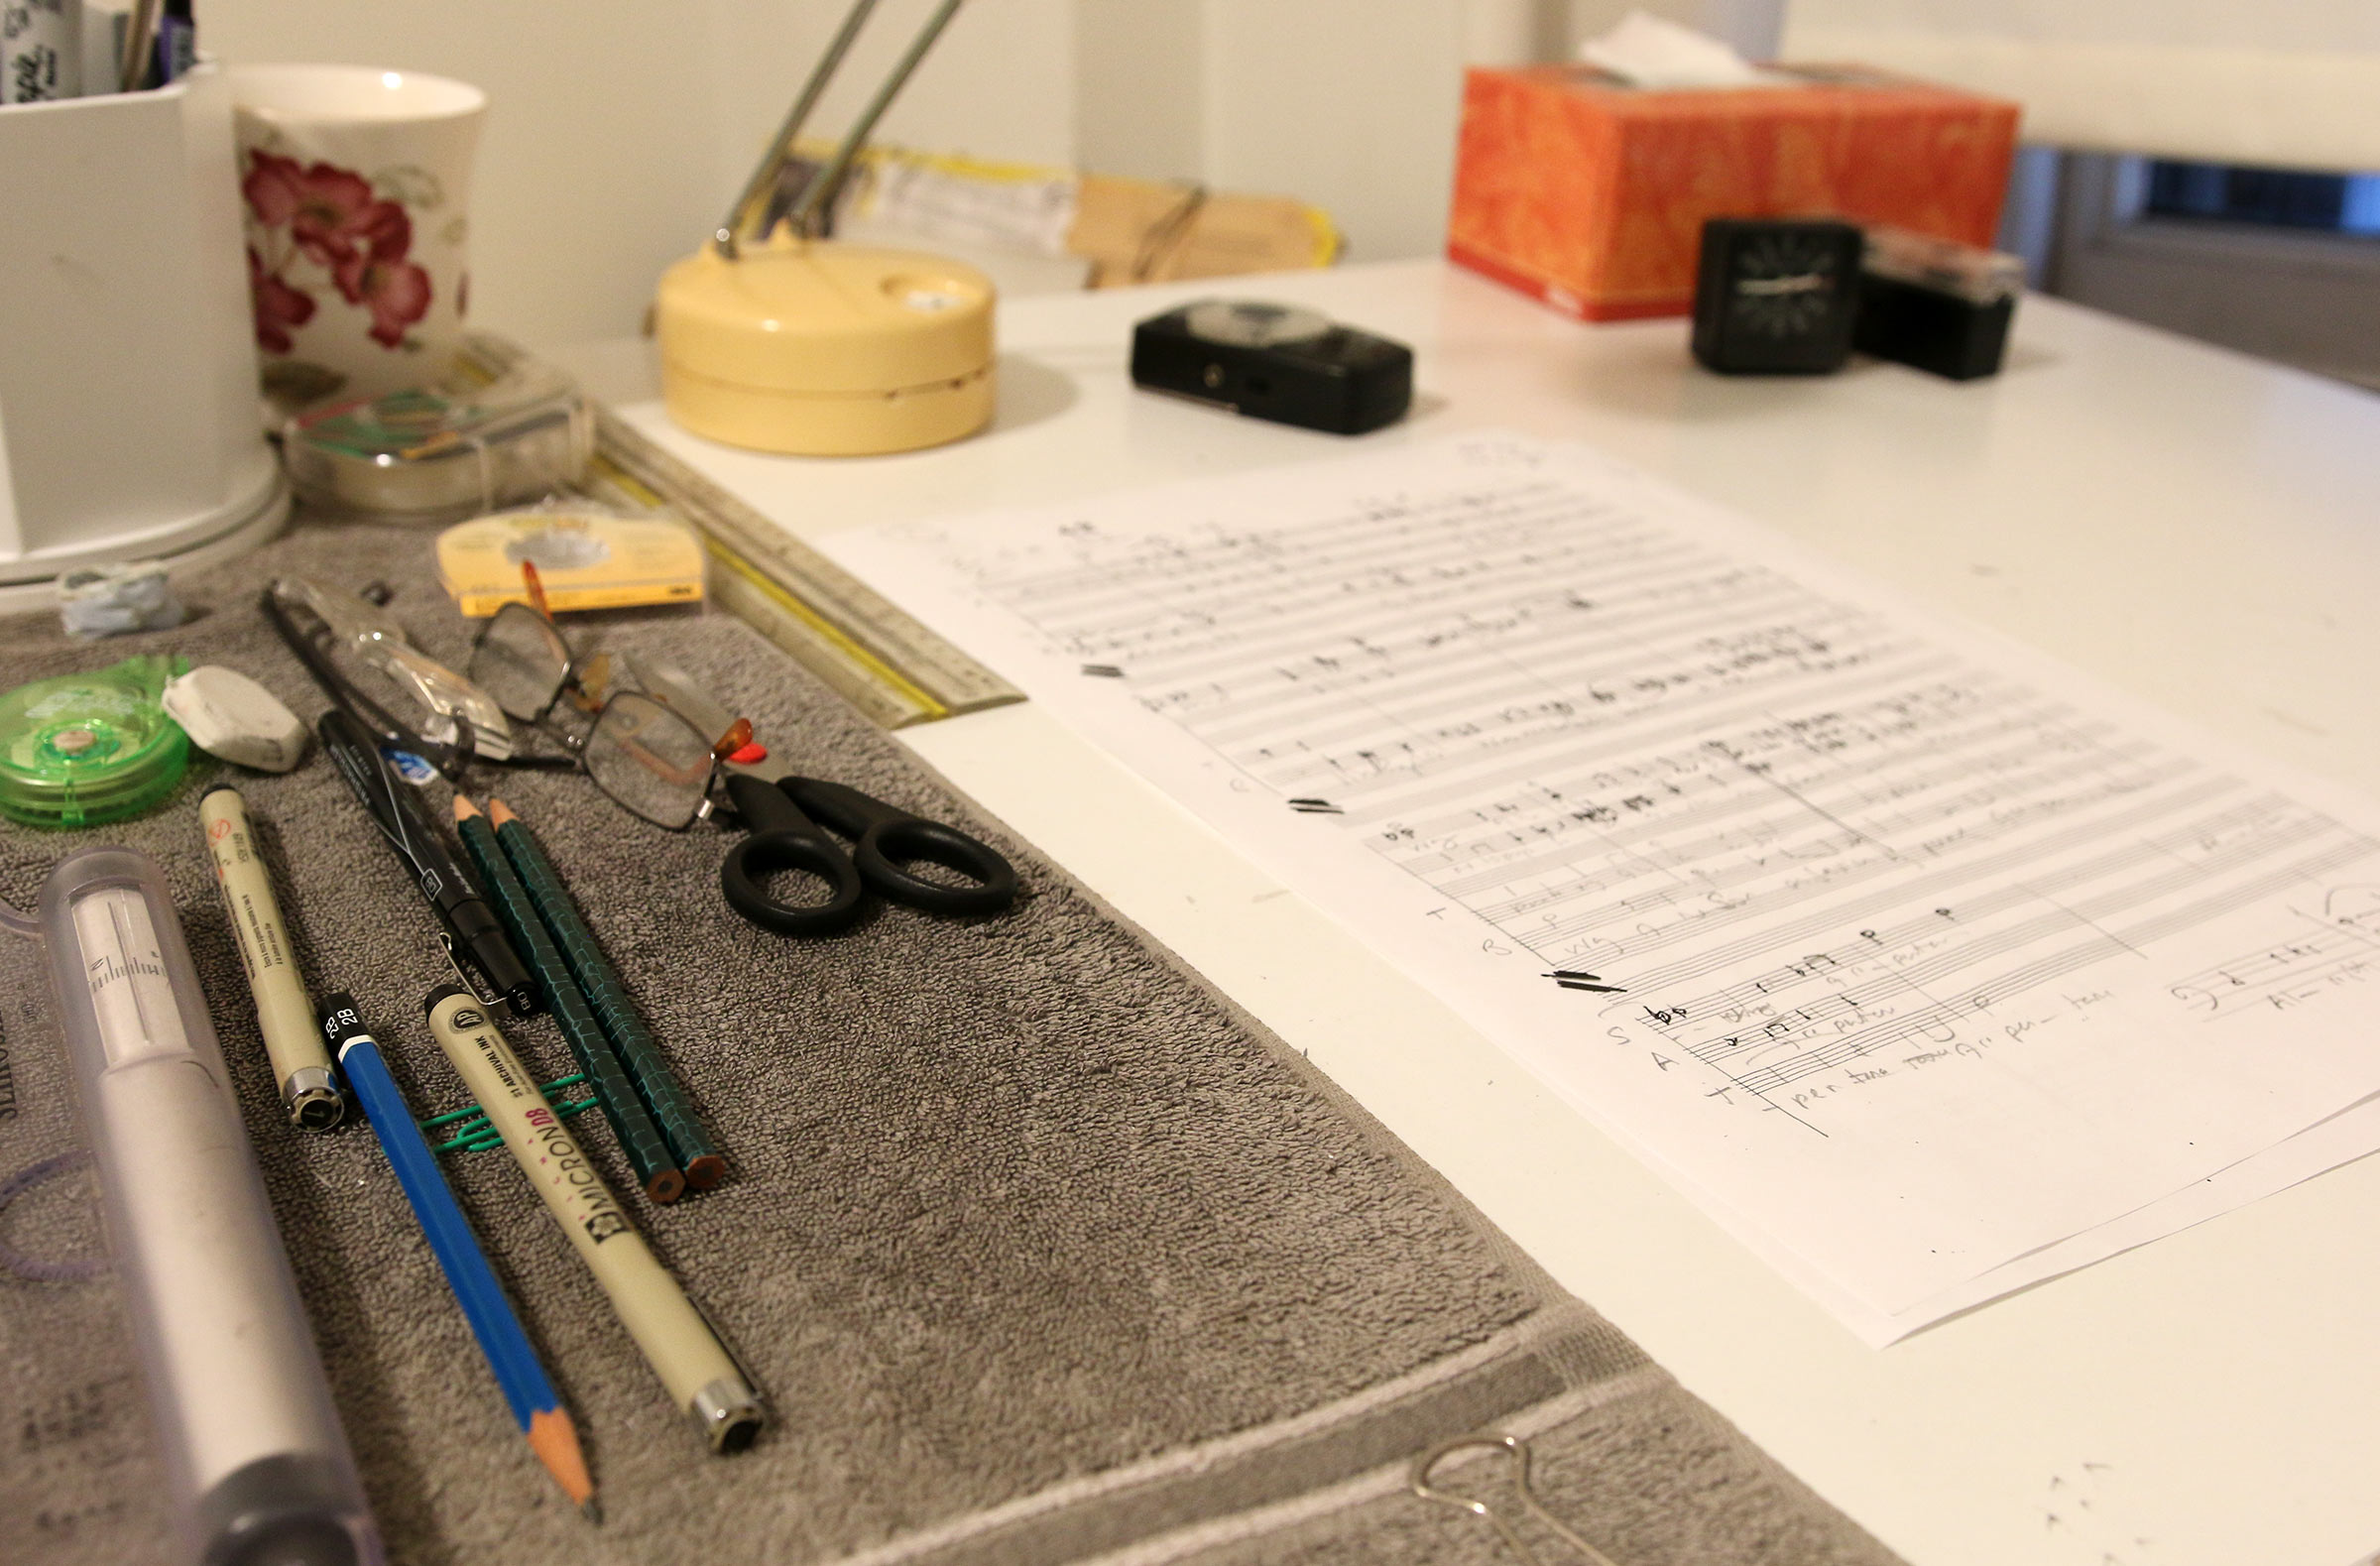 Pencils, a pair of glasses, scissors, a box of tissues and a sheet of music manuscript paper on a desk.